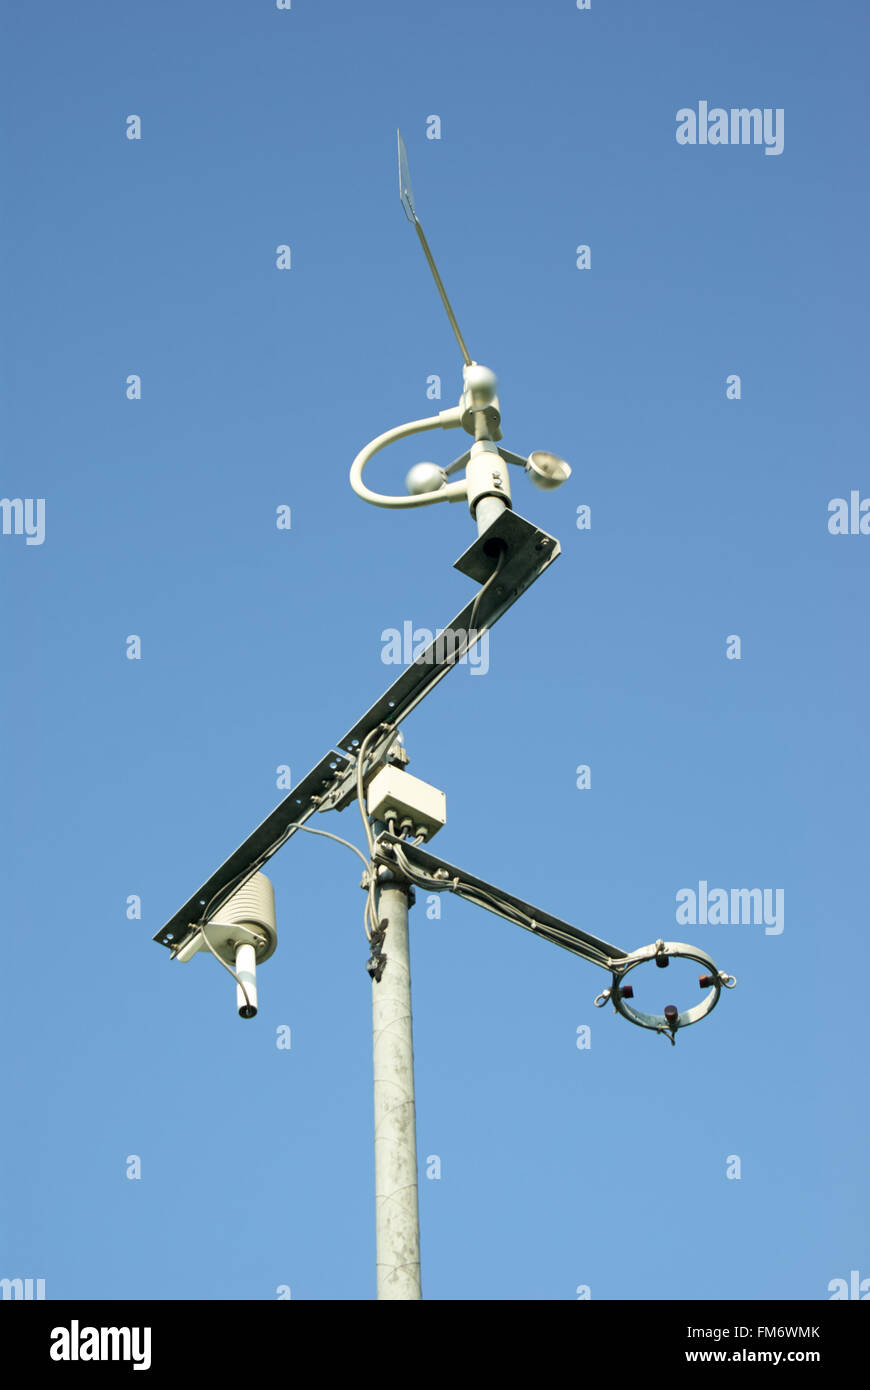 MINSK, BELARUS - AUGUST 2, 2015 - Meteorological station and tools on the blue background of the sky. Stock Photo